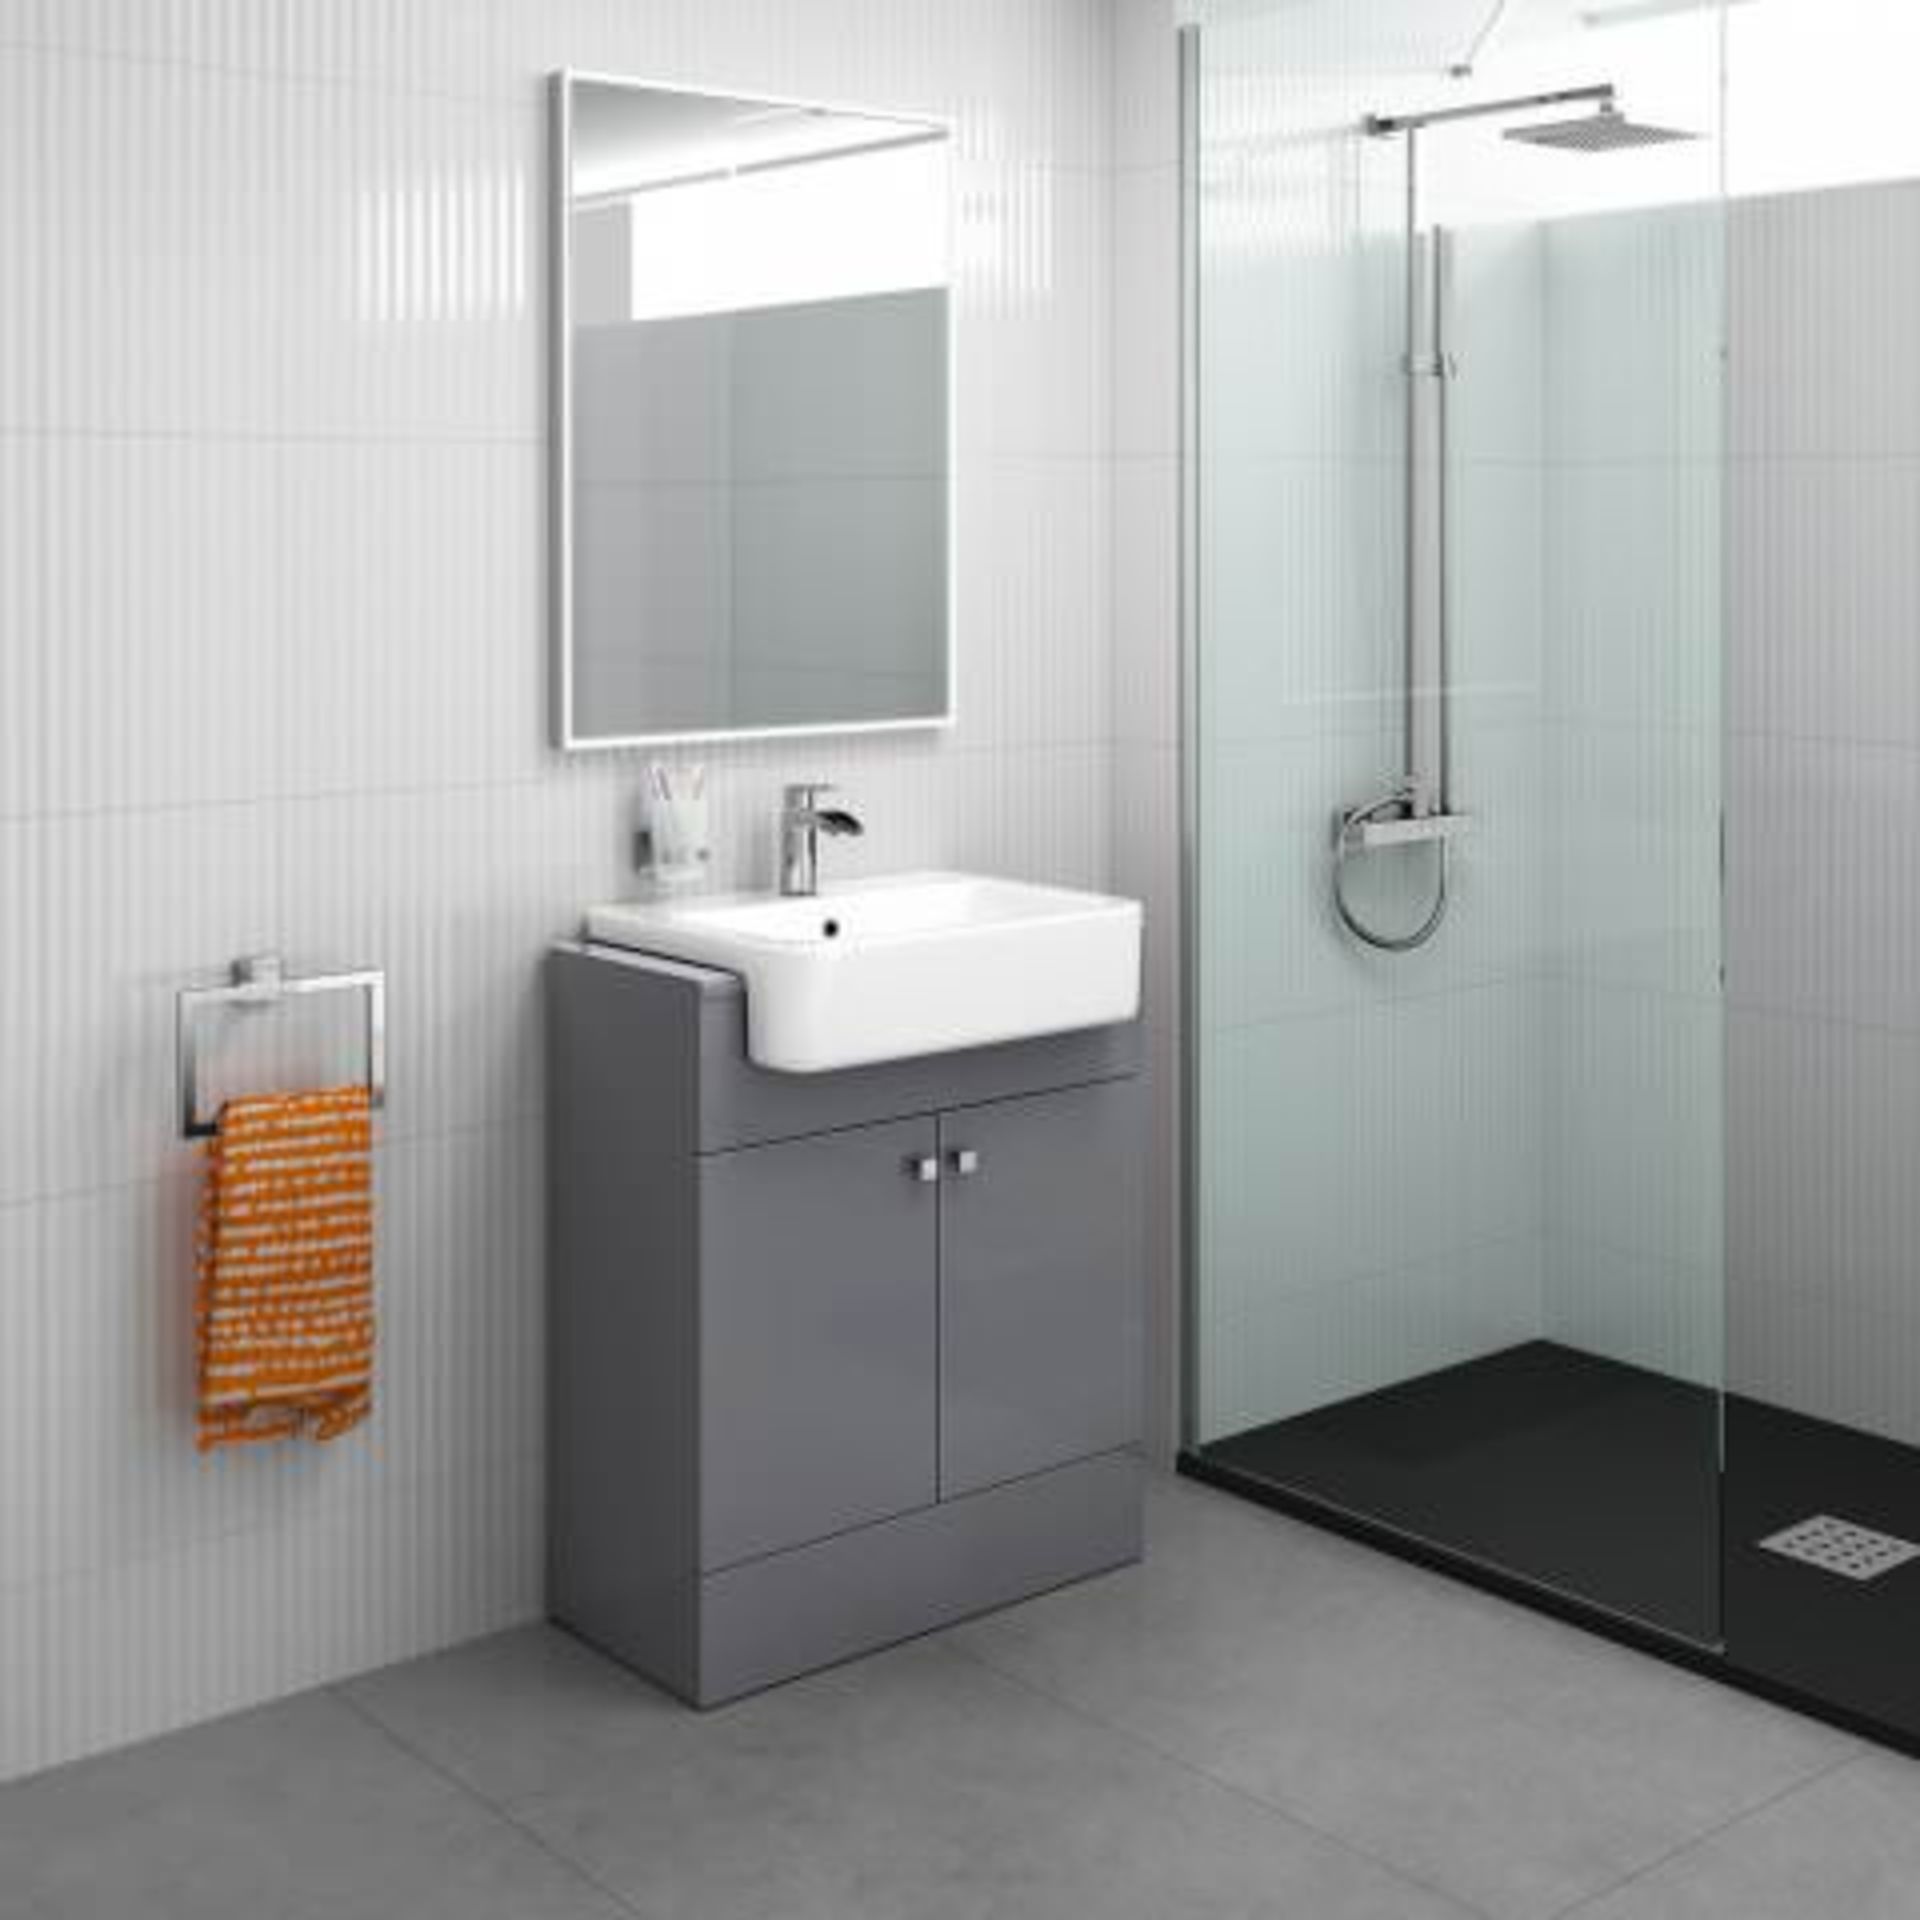 660mm Harper Gloss Grey Basin Vanity Unit - Floor Standing. RRP £749.99. COMES COMPLETE WITH B... - Image 2 of 4